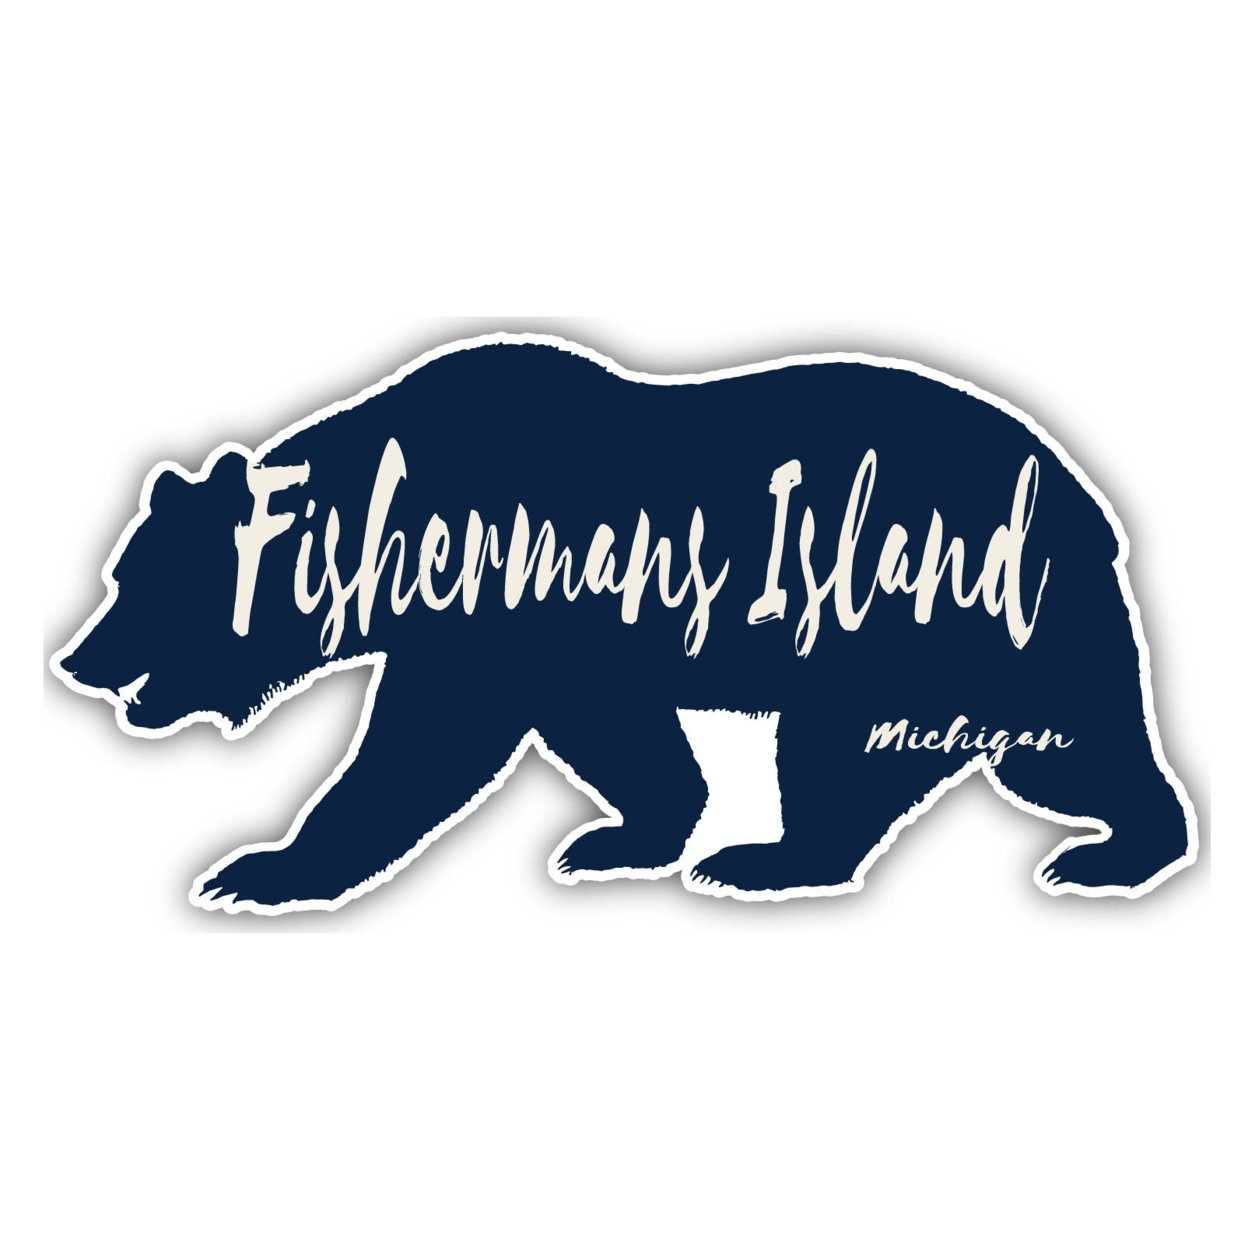 Fishermans Island Michigan Souvenir Decorative Stickers (Choose Theme And Size) - 4-Pack, 8-Inch, Bear